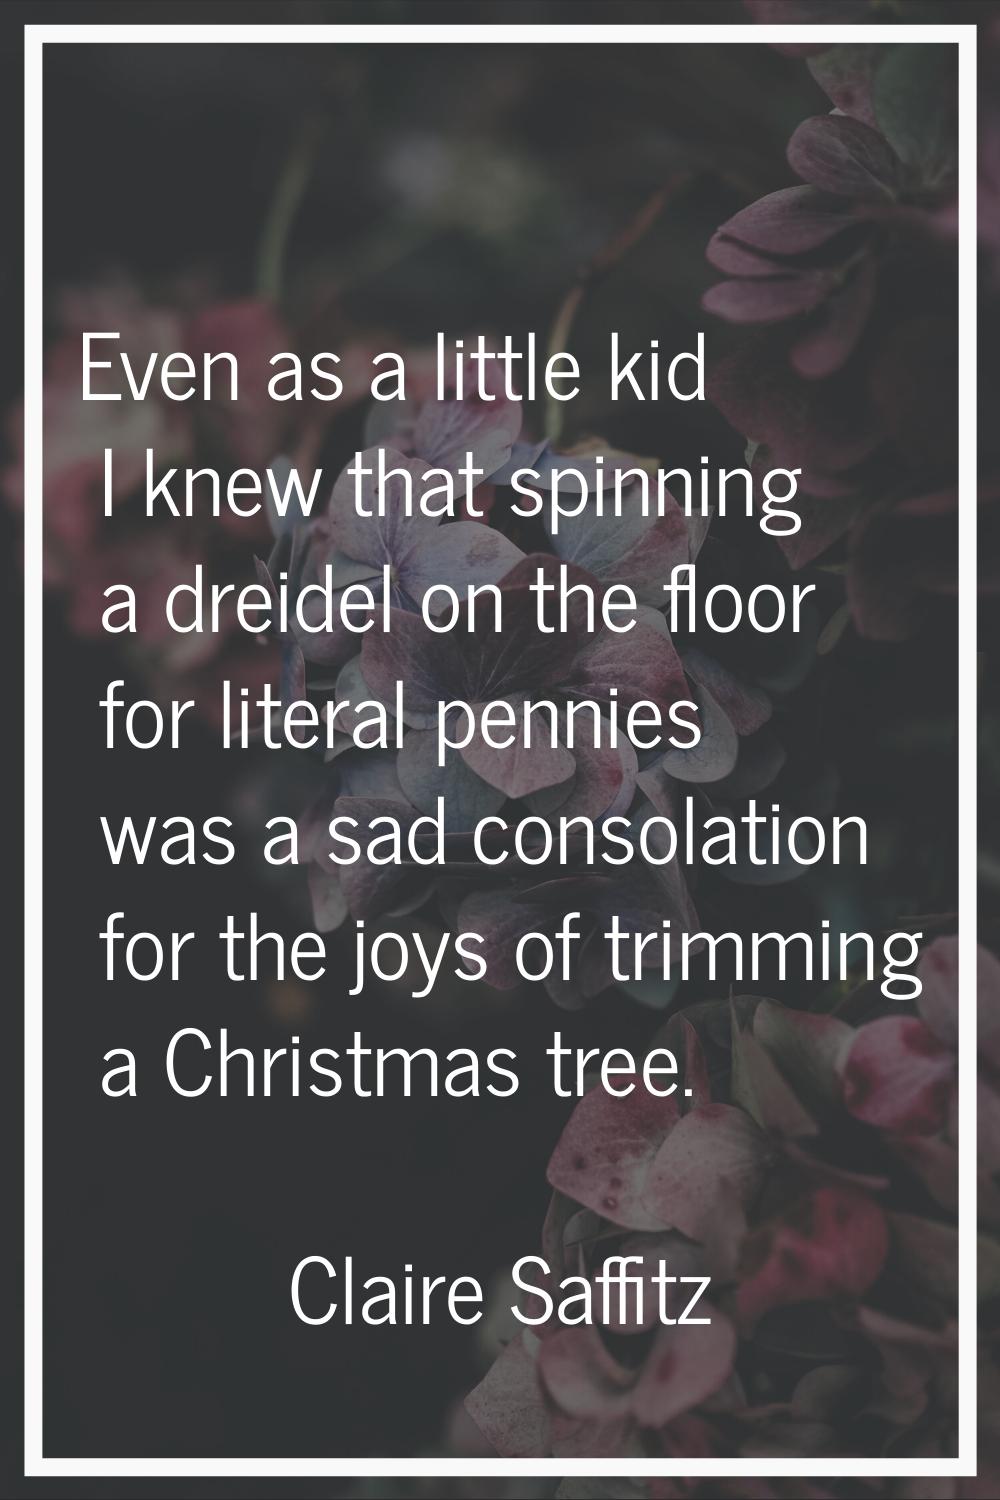 Even as a little kid I knew that spinning a dreidel on the floor for literal pennies was a sad cons